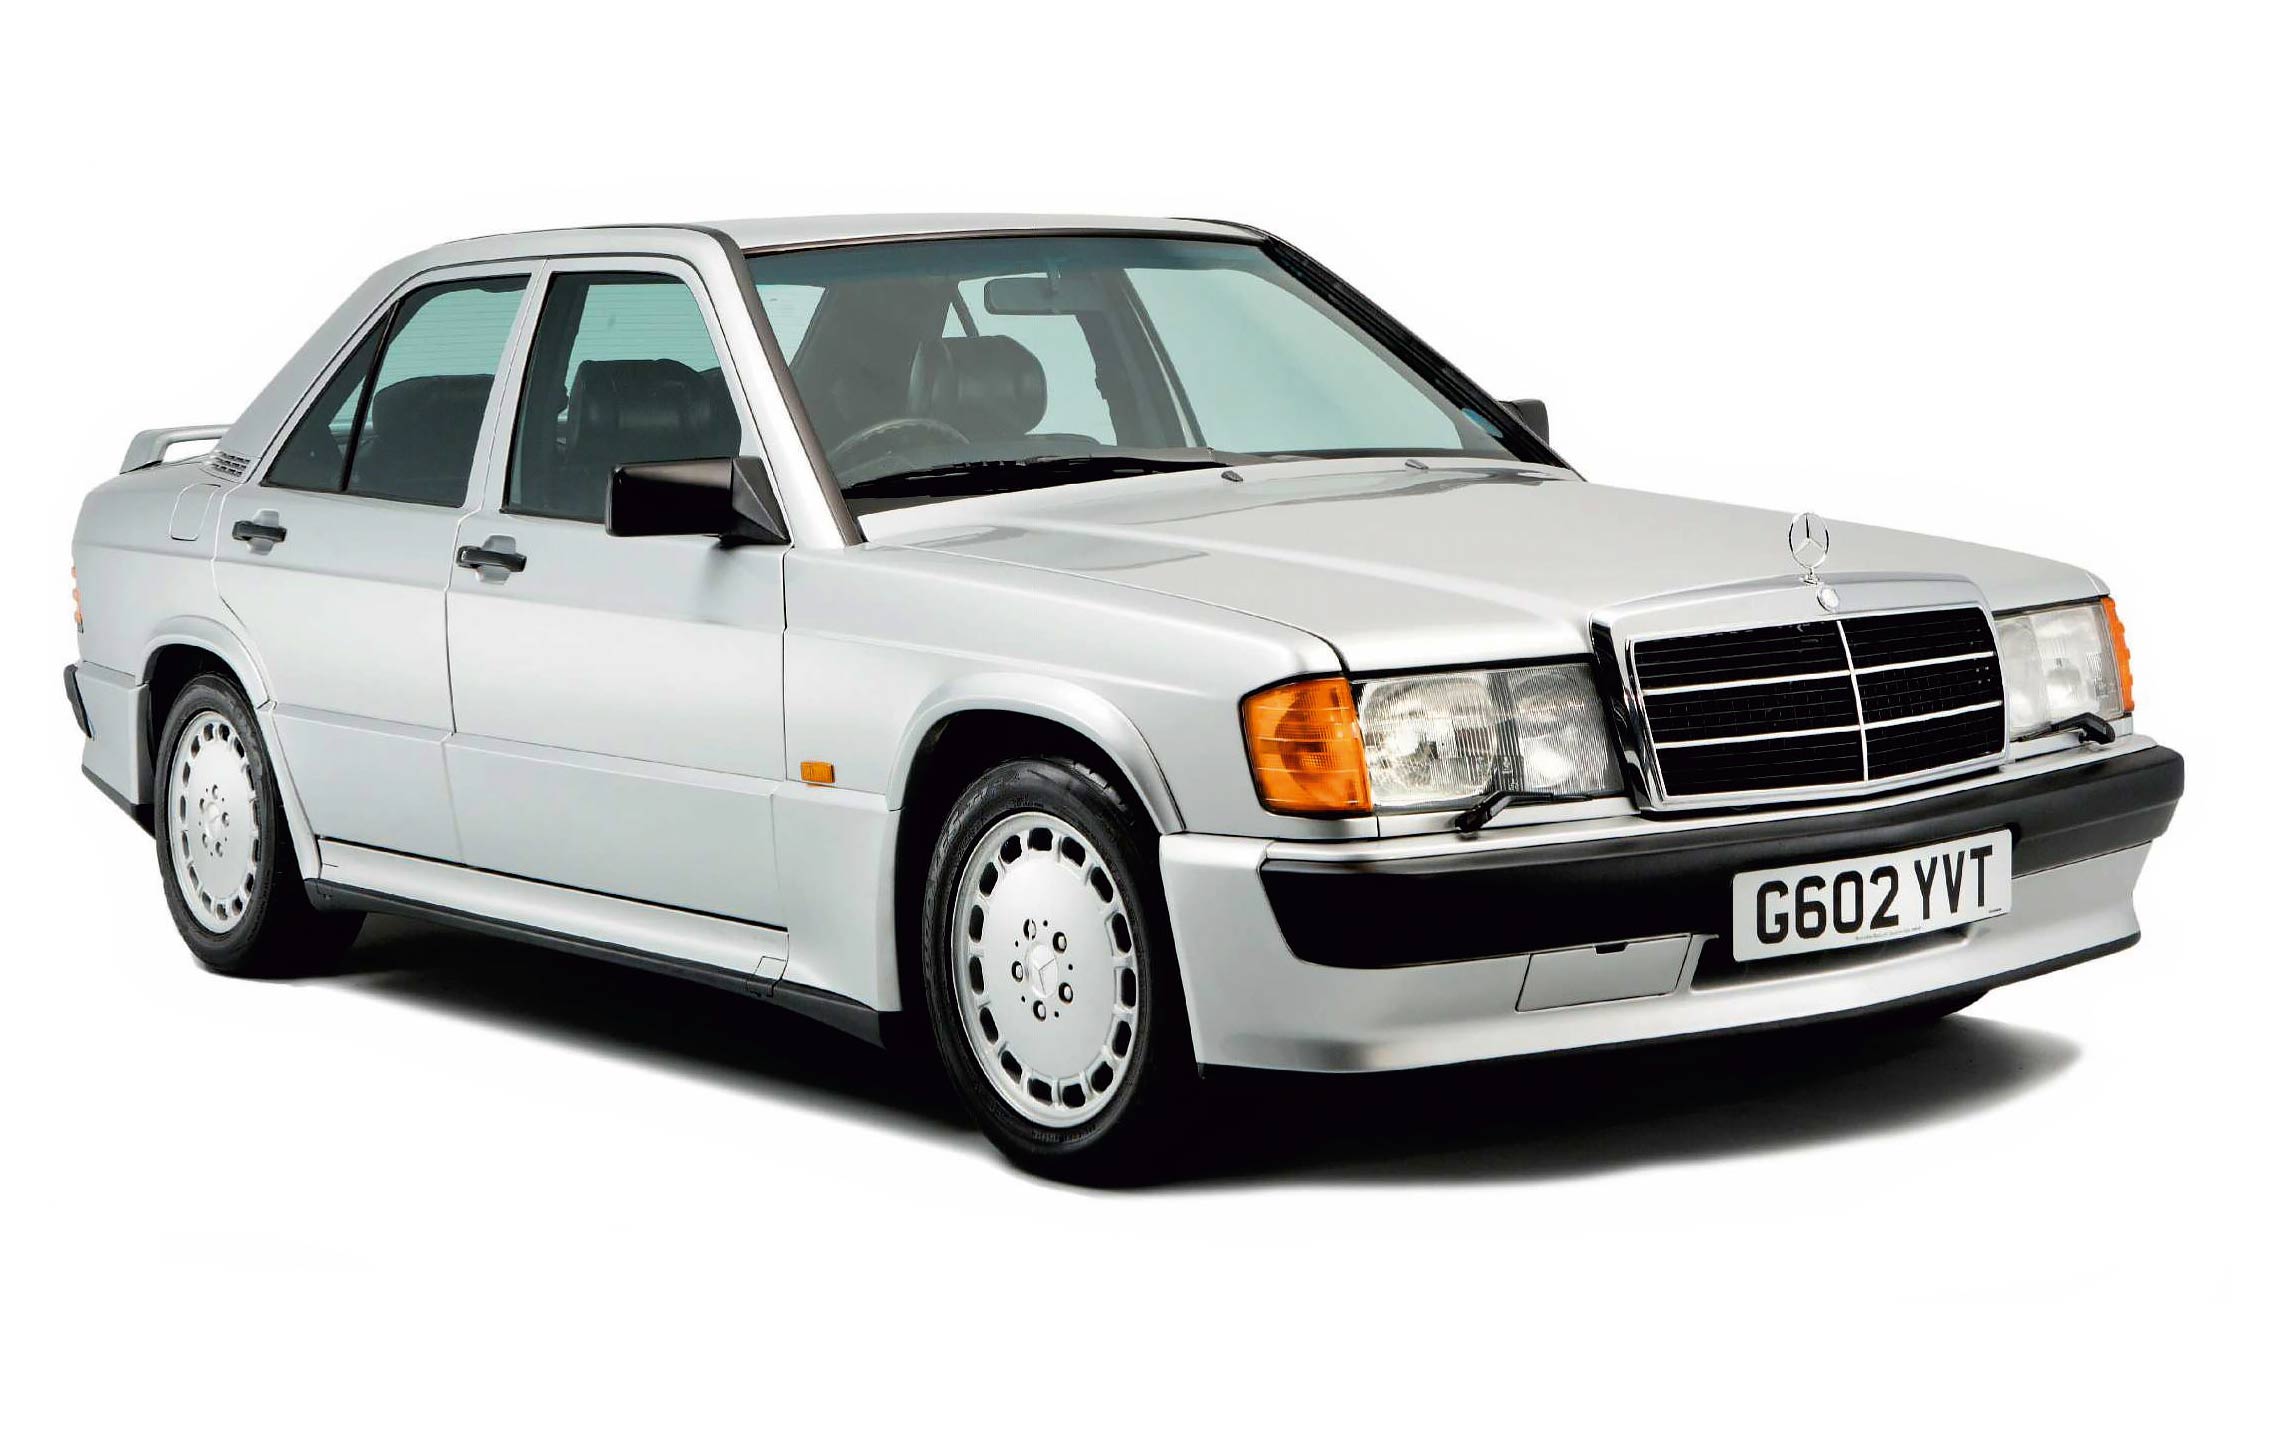 Buying Guide 190E 16v W201 - Drive